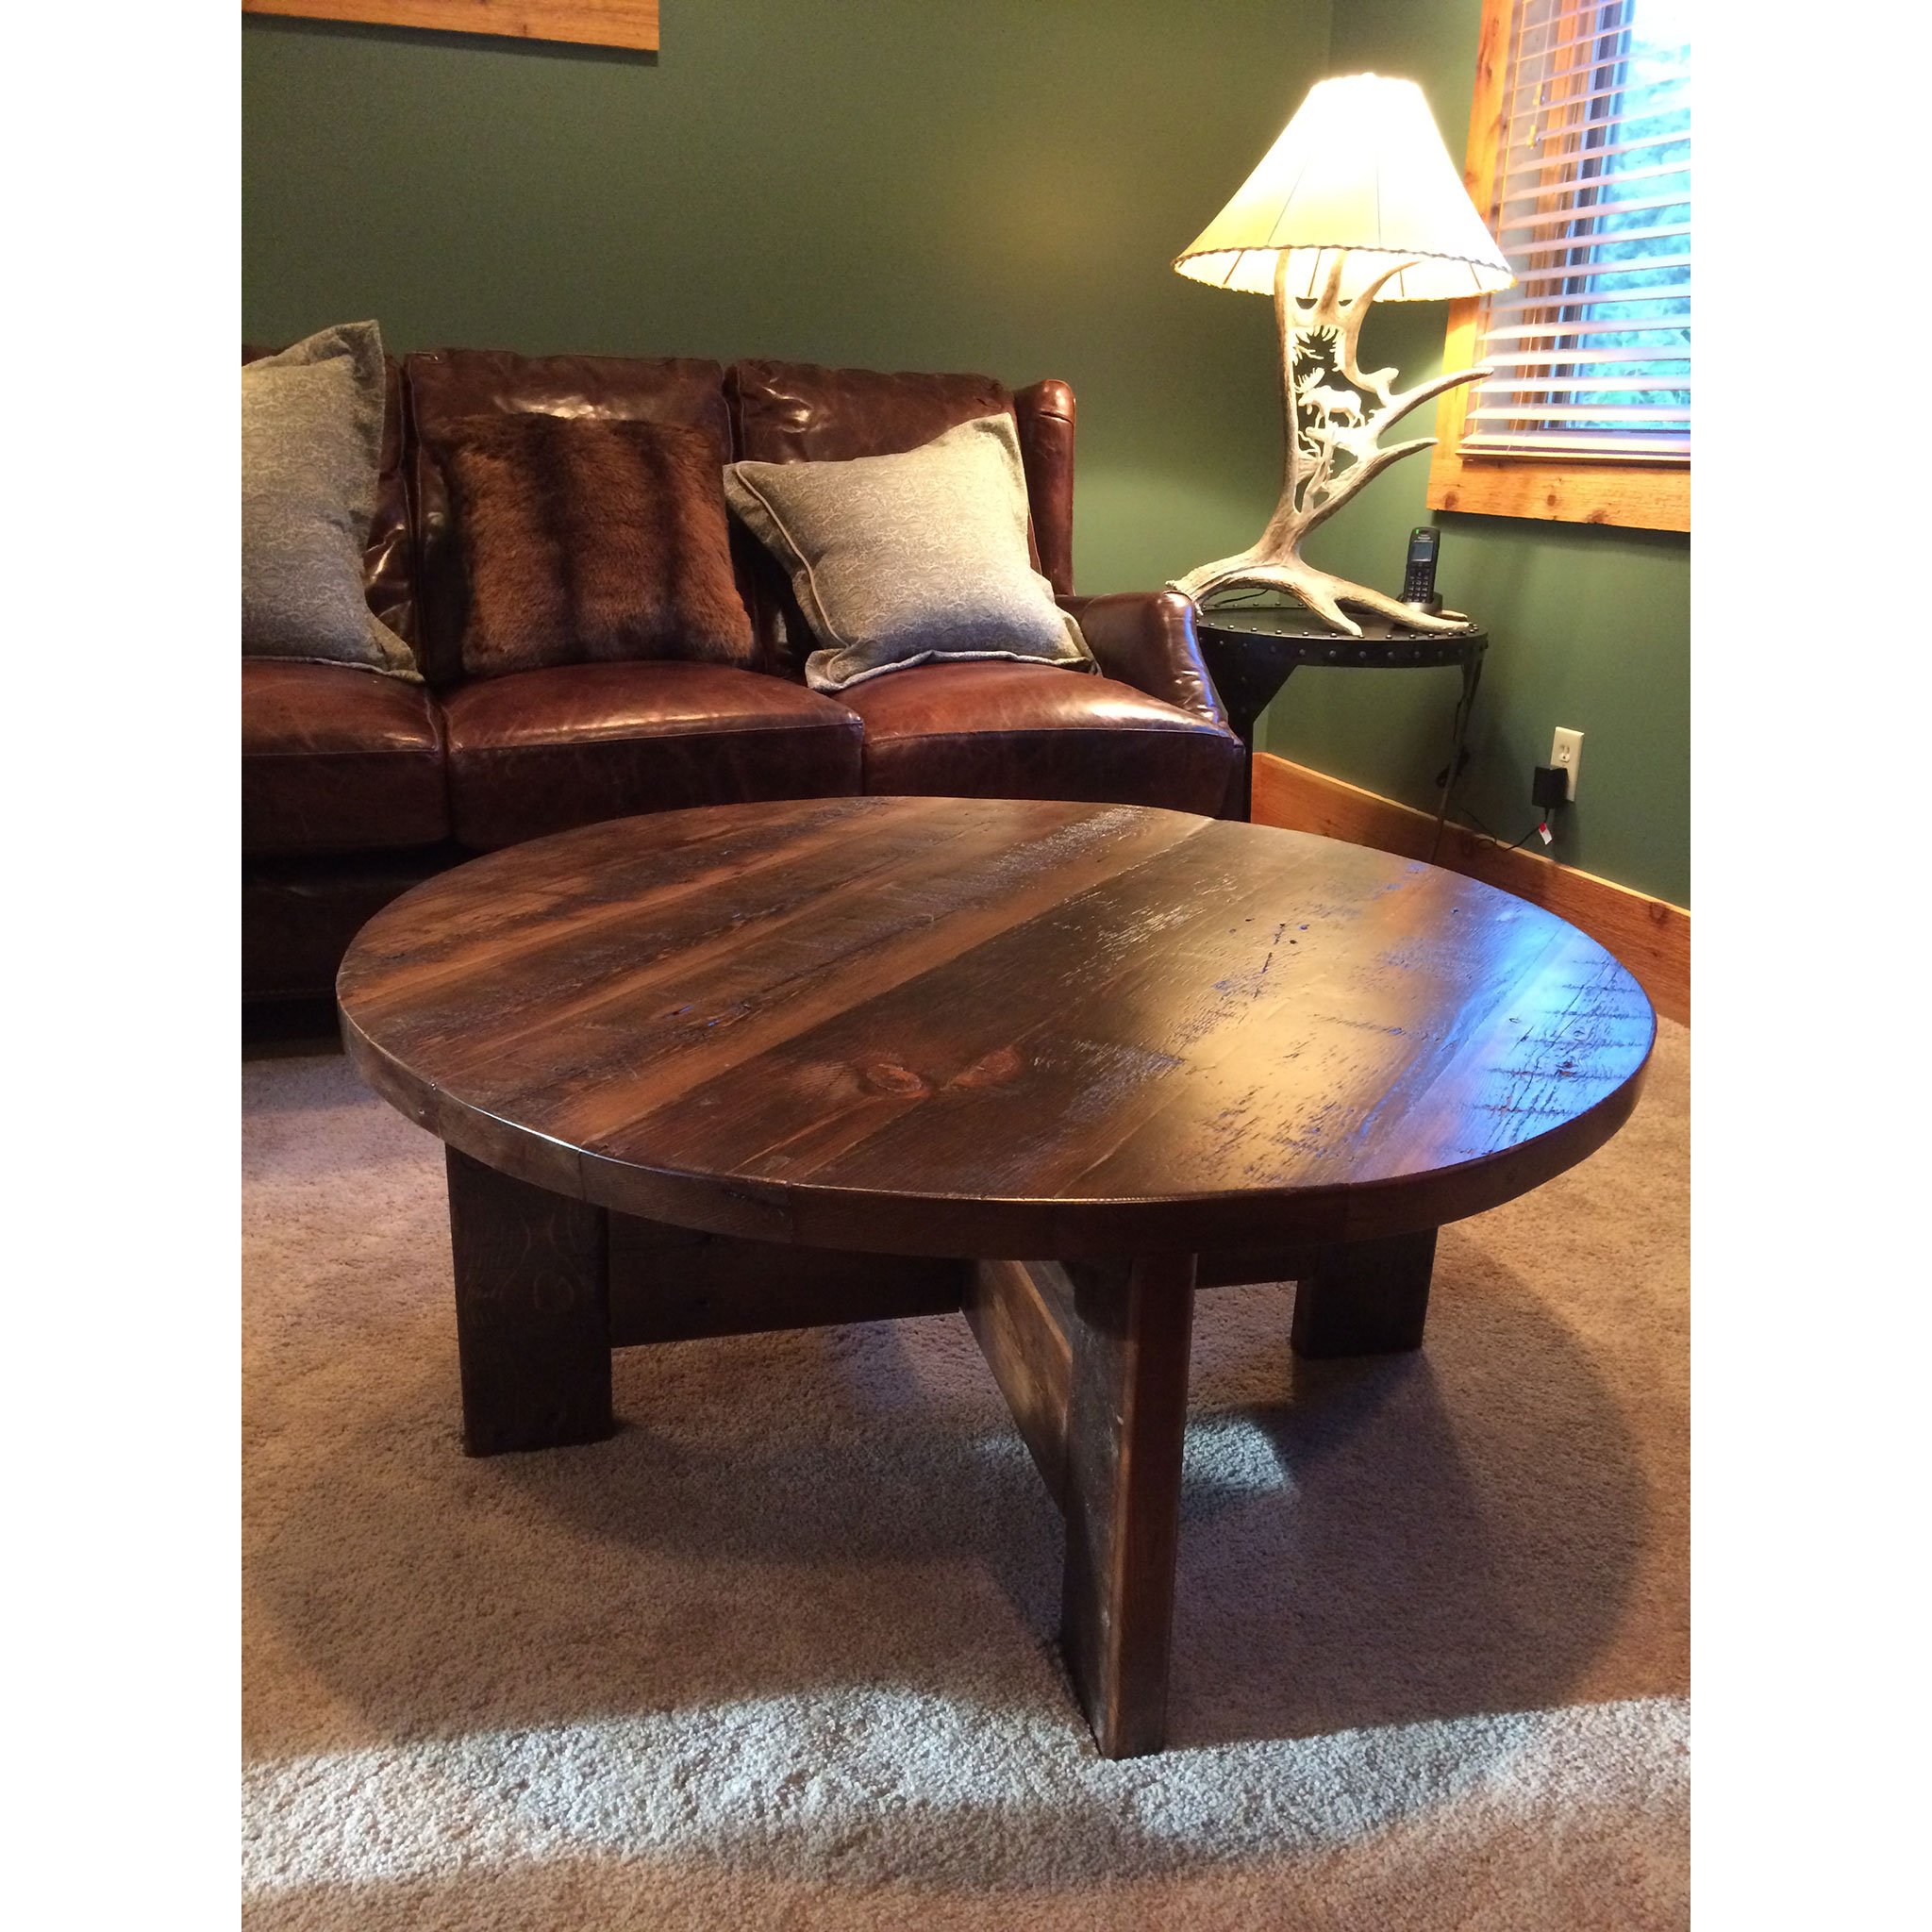 Reclaimed Wood Round Coffee Table, Round Reclaimed Wood Coffee Table With Storage